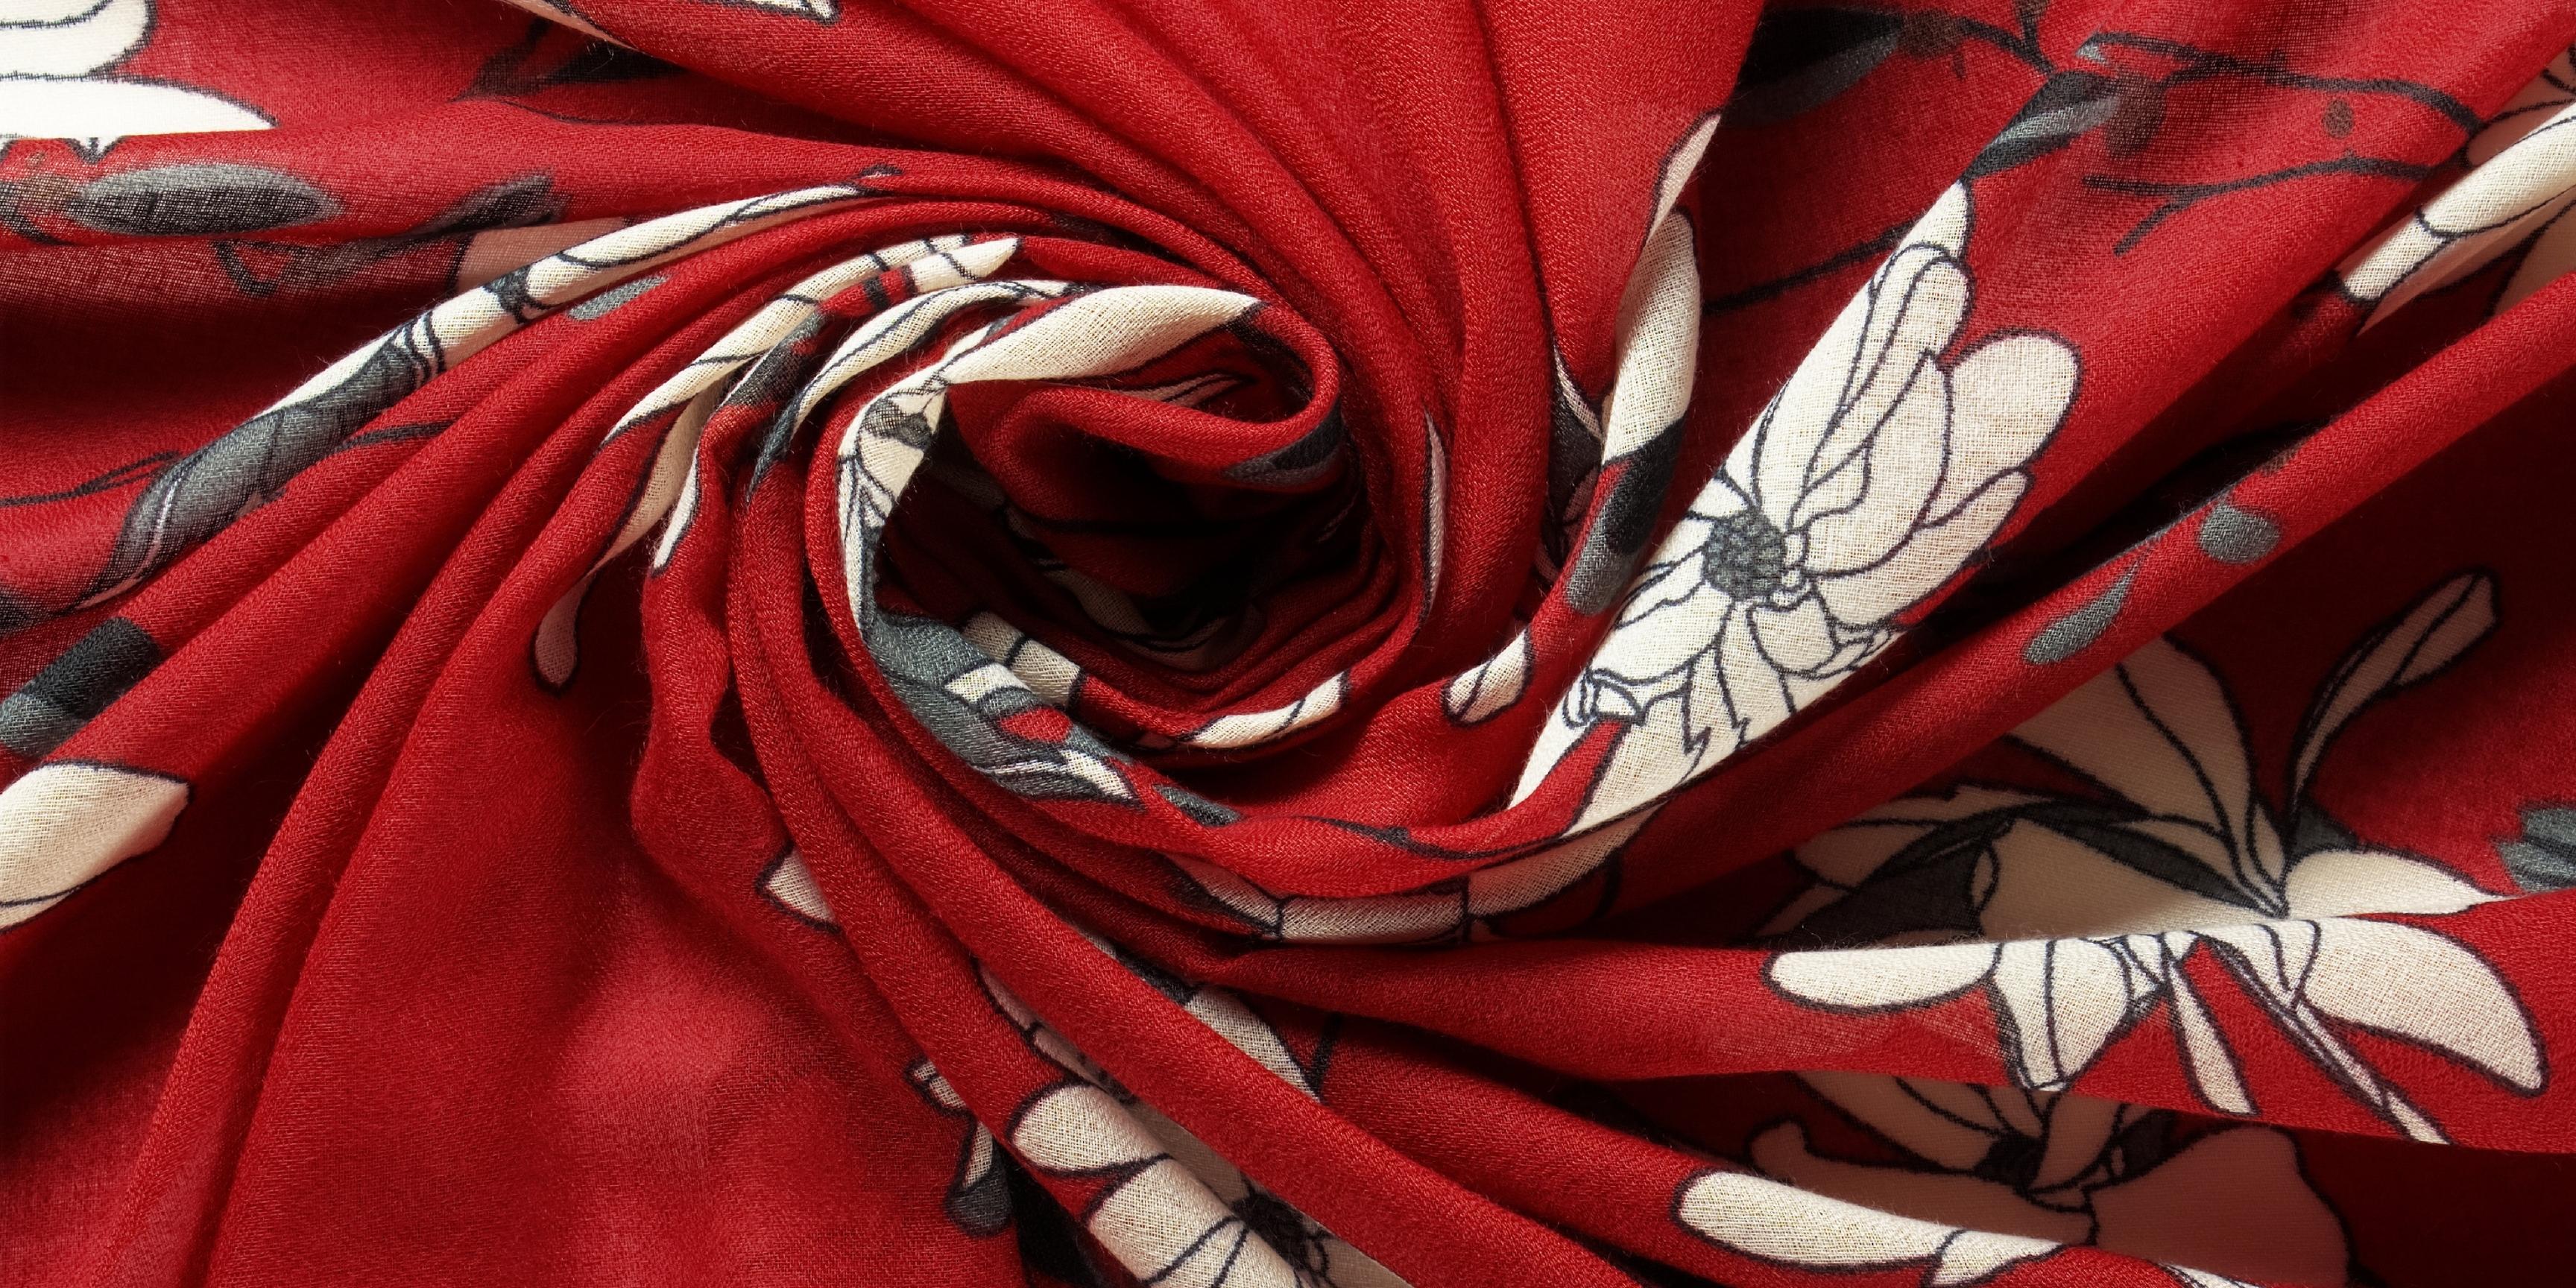 Load video: Elegant scarves with Scaarf.com